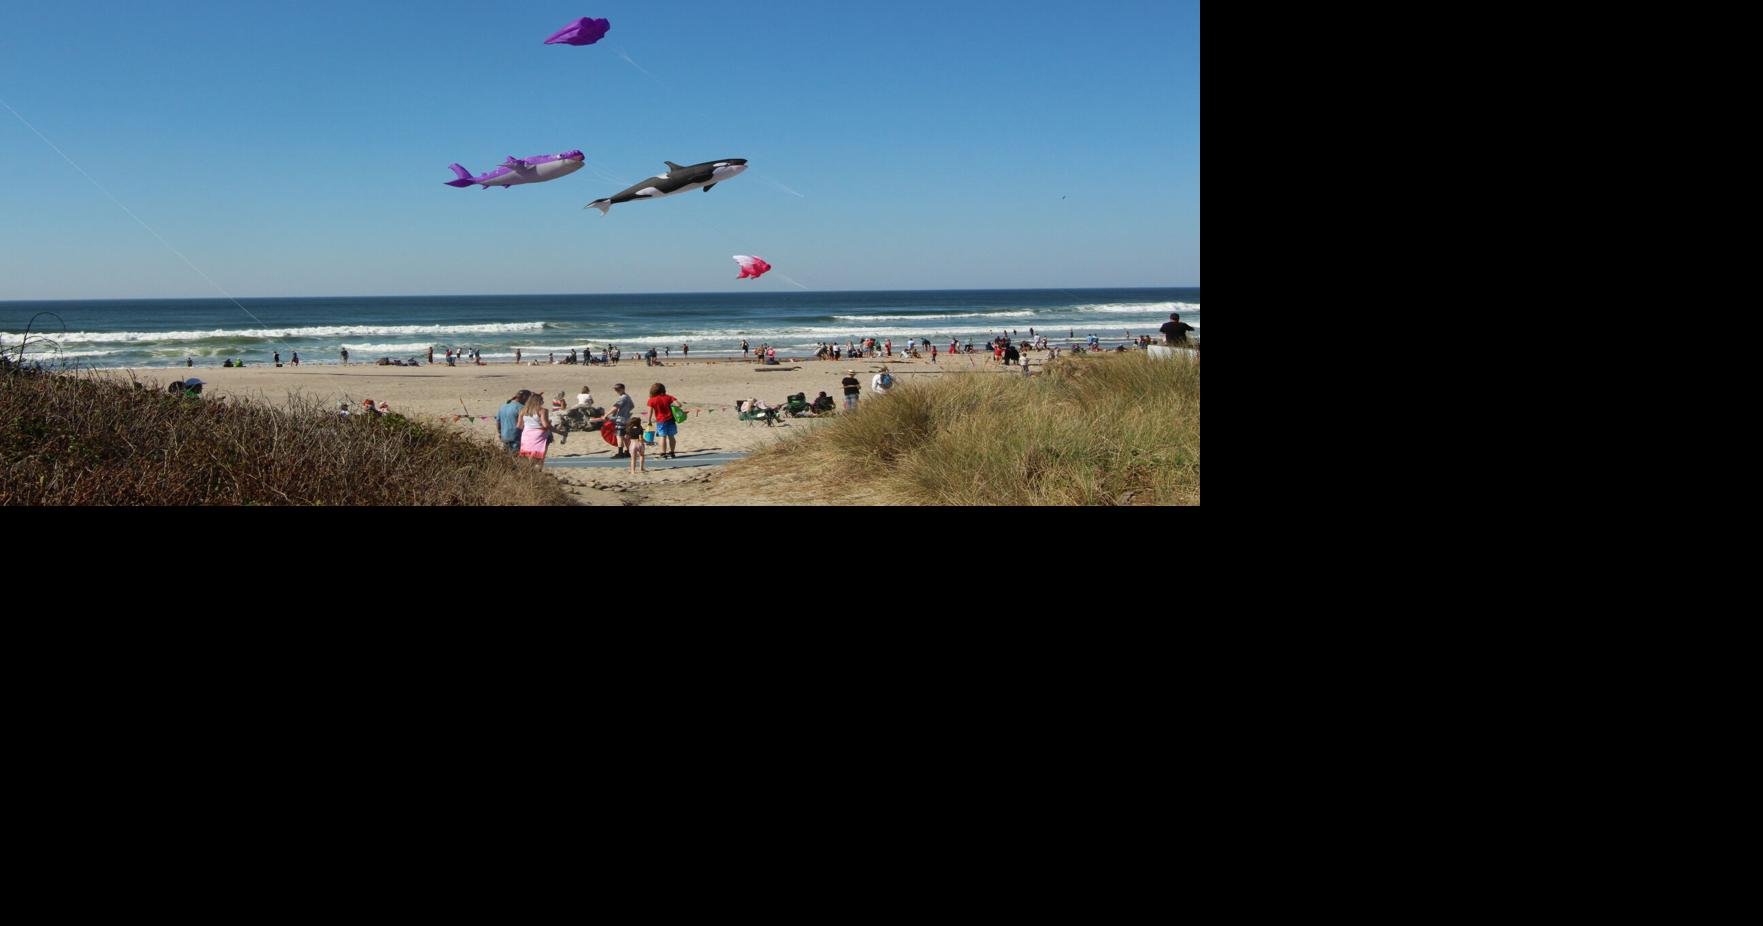 Photos / In the Air Fall Kite Festival in Lincoln City News